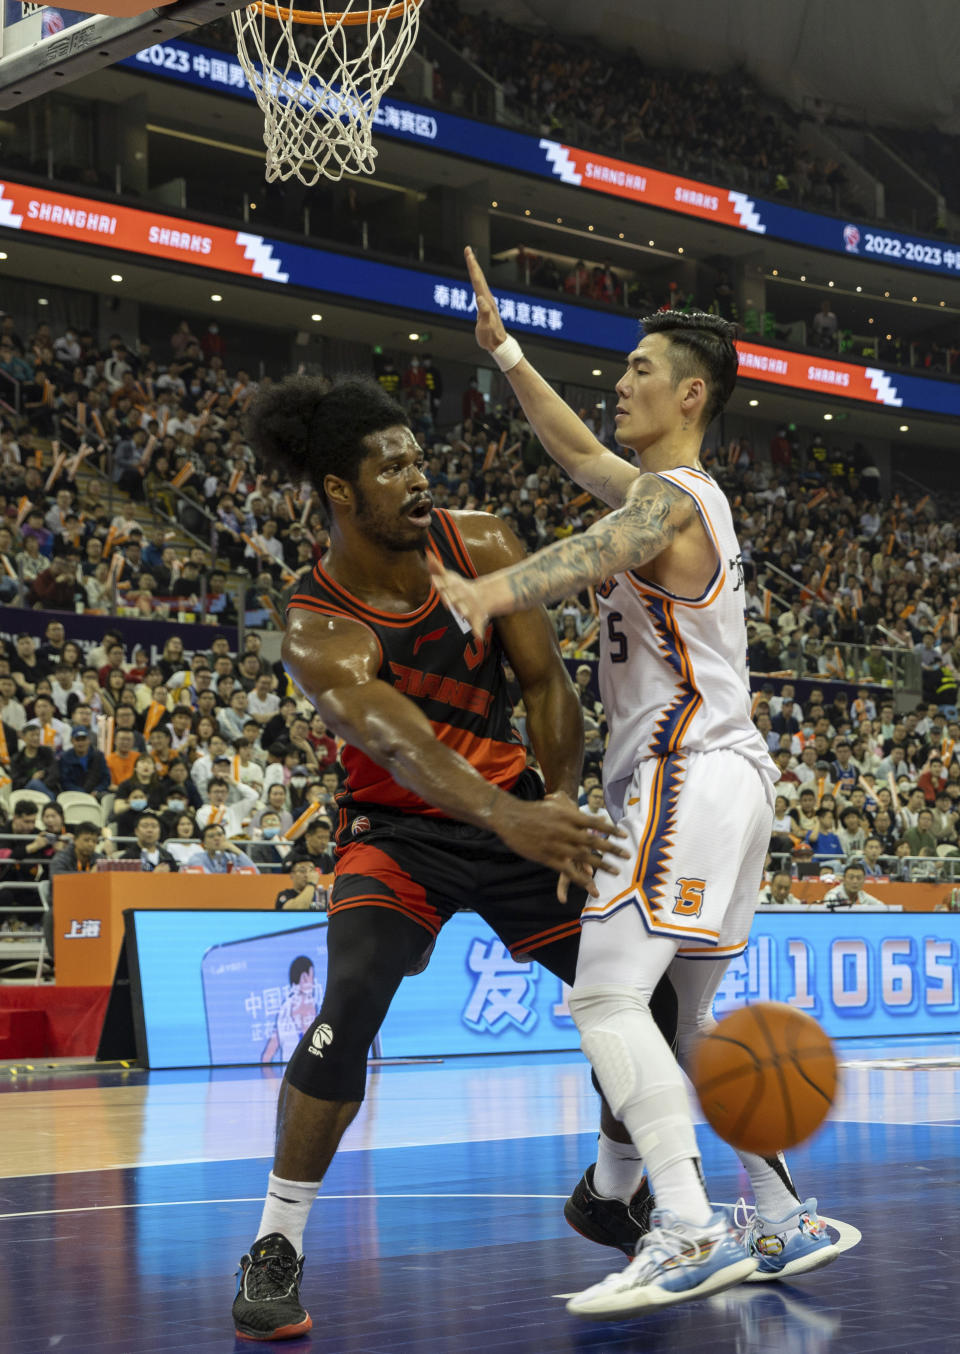 In this photo released by China's Xinhua News Agency, Devin Williams, left, of the Jiangsu Dragons passes the ball during a playoff basketball game between the Shanghai Sharks and the Jiangsu Dragons in Shanghai, Friday, April 14, 2023. The Chinese Basketball Association has ordered an investigation into a championship round game that ended with a last-minute, come-from-behind win following an series of turnovers. (Wang Xiang/Xinhua via AP)